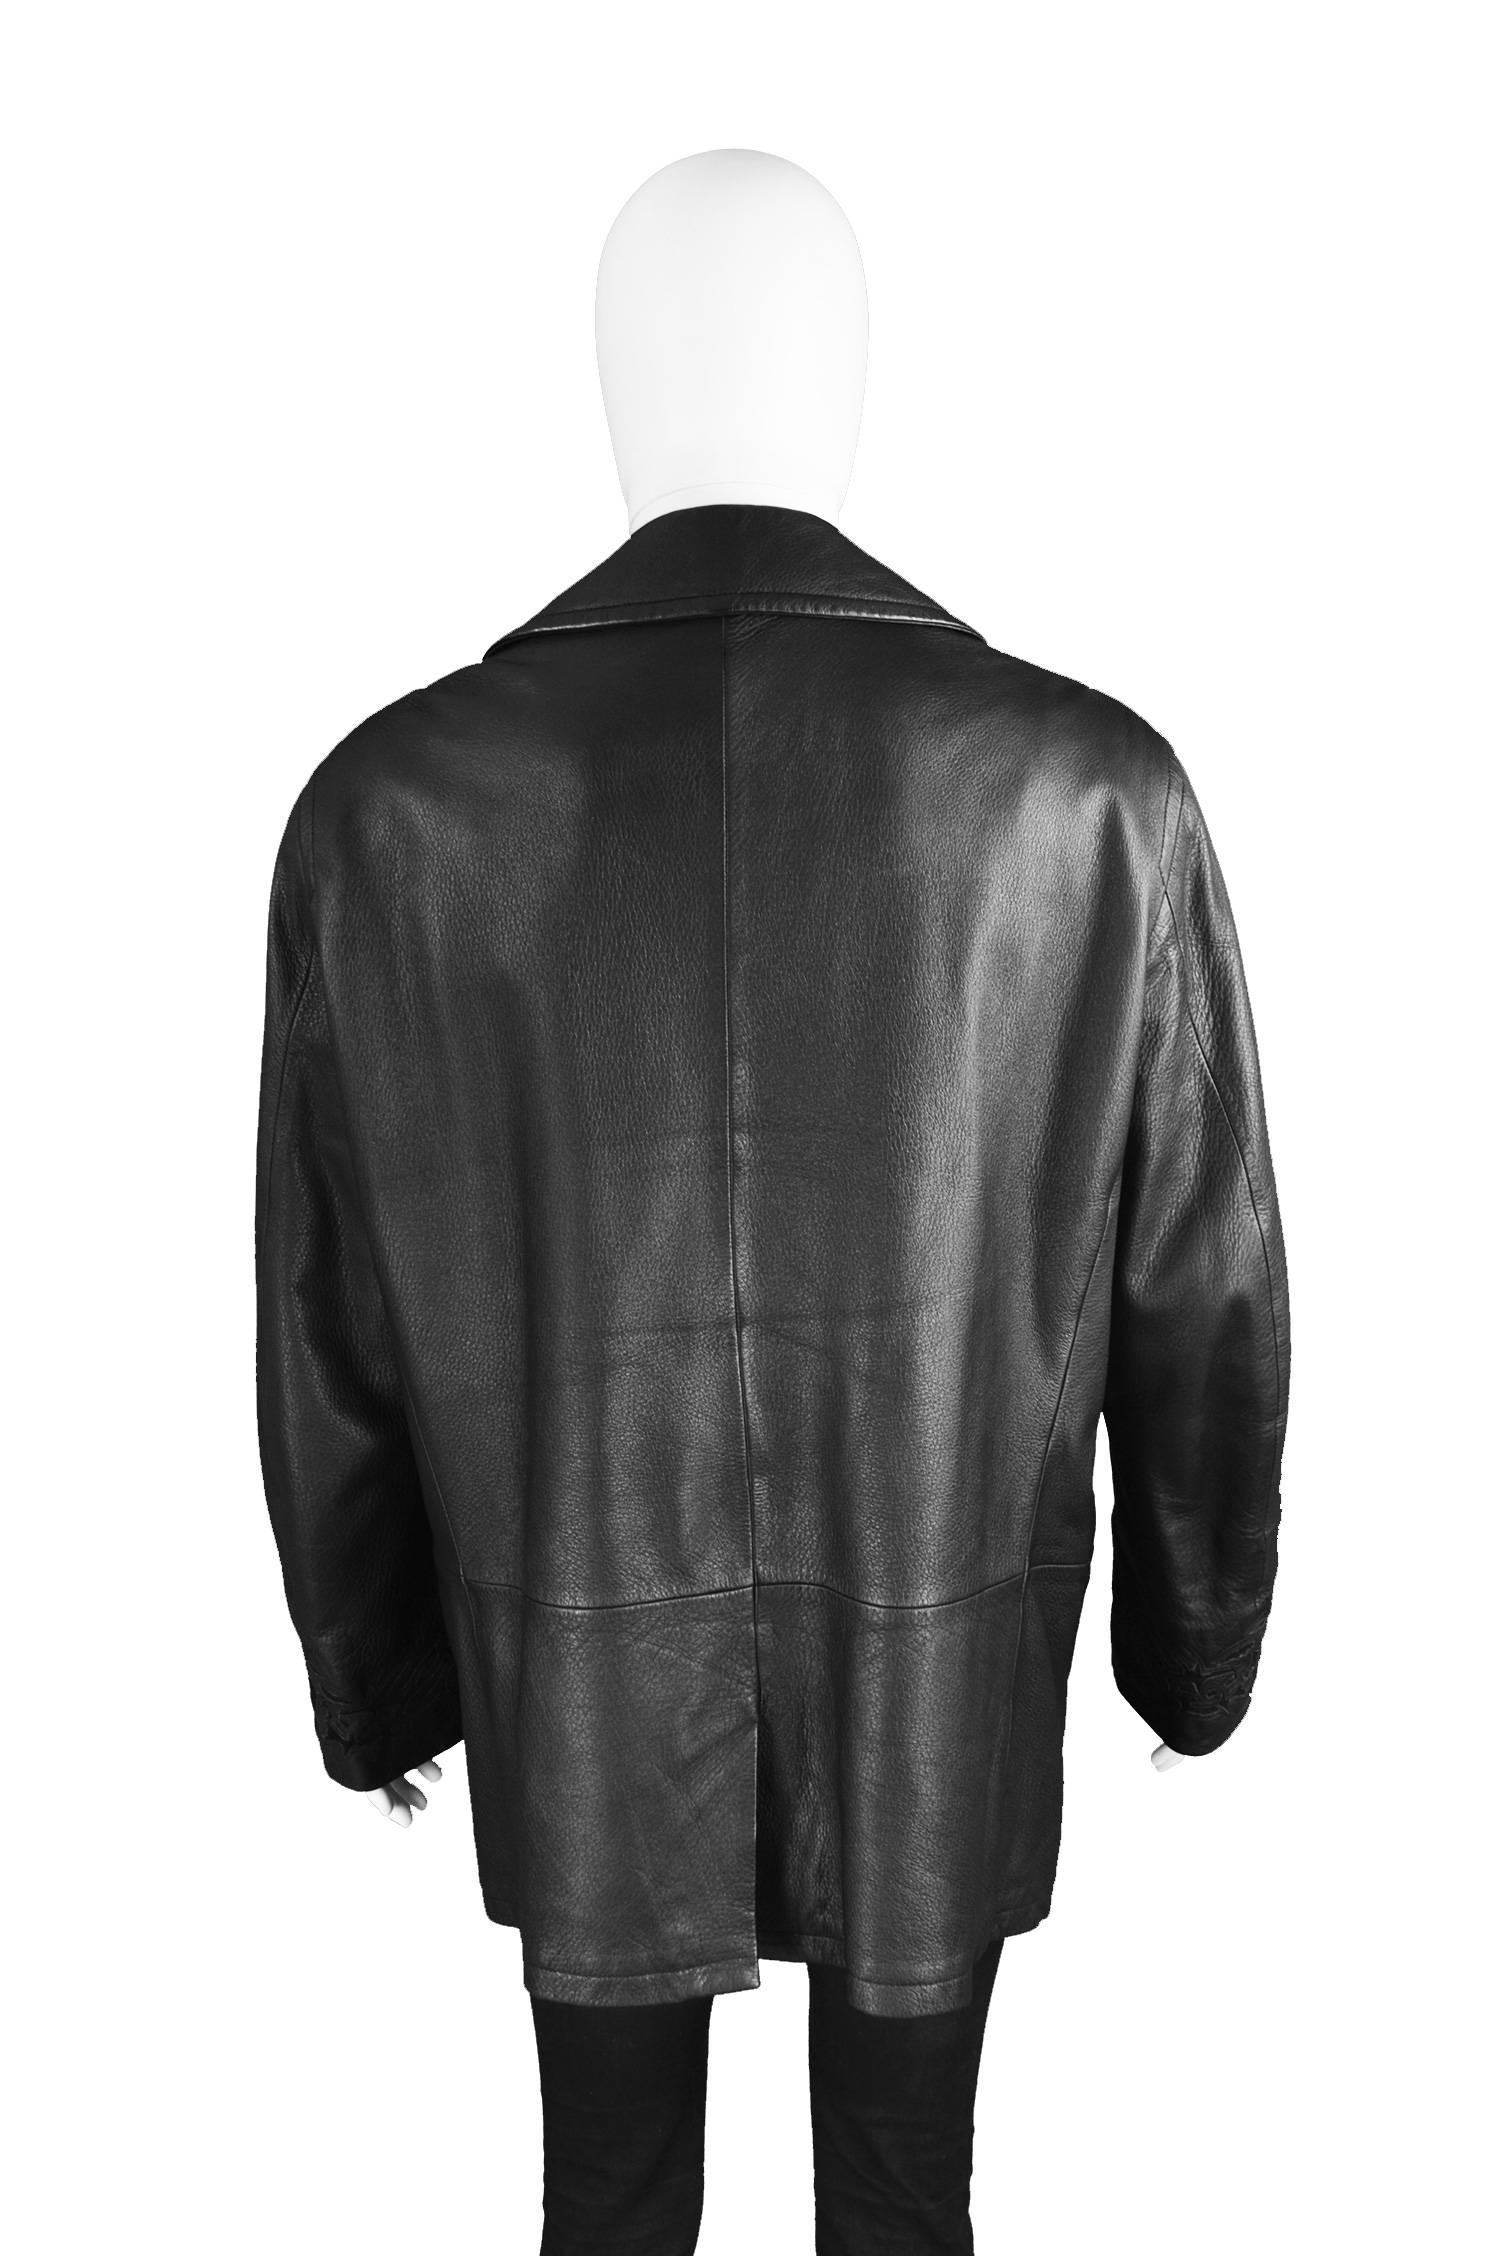 Gianni Versace Men's Black Leather Double Breasted Jacket, A/W 2002  For Sale 6